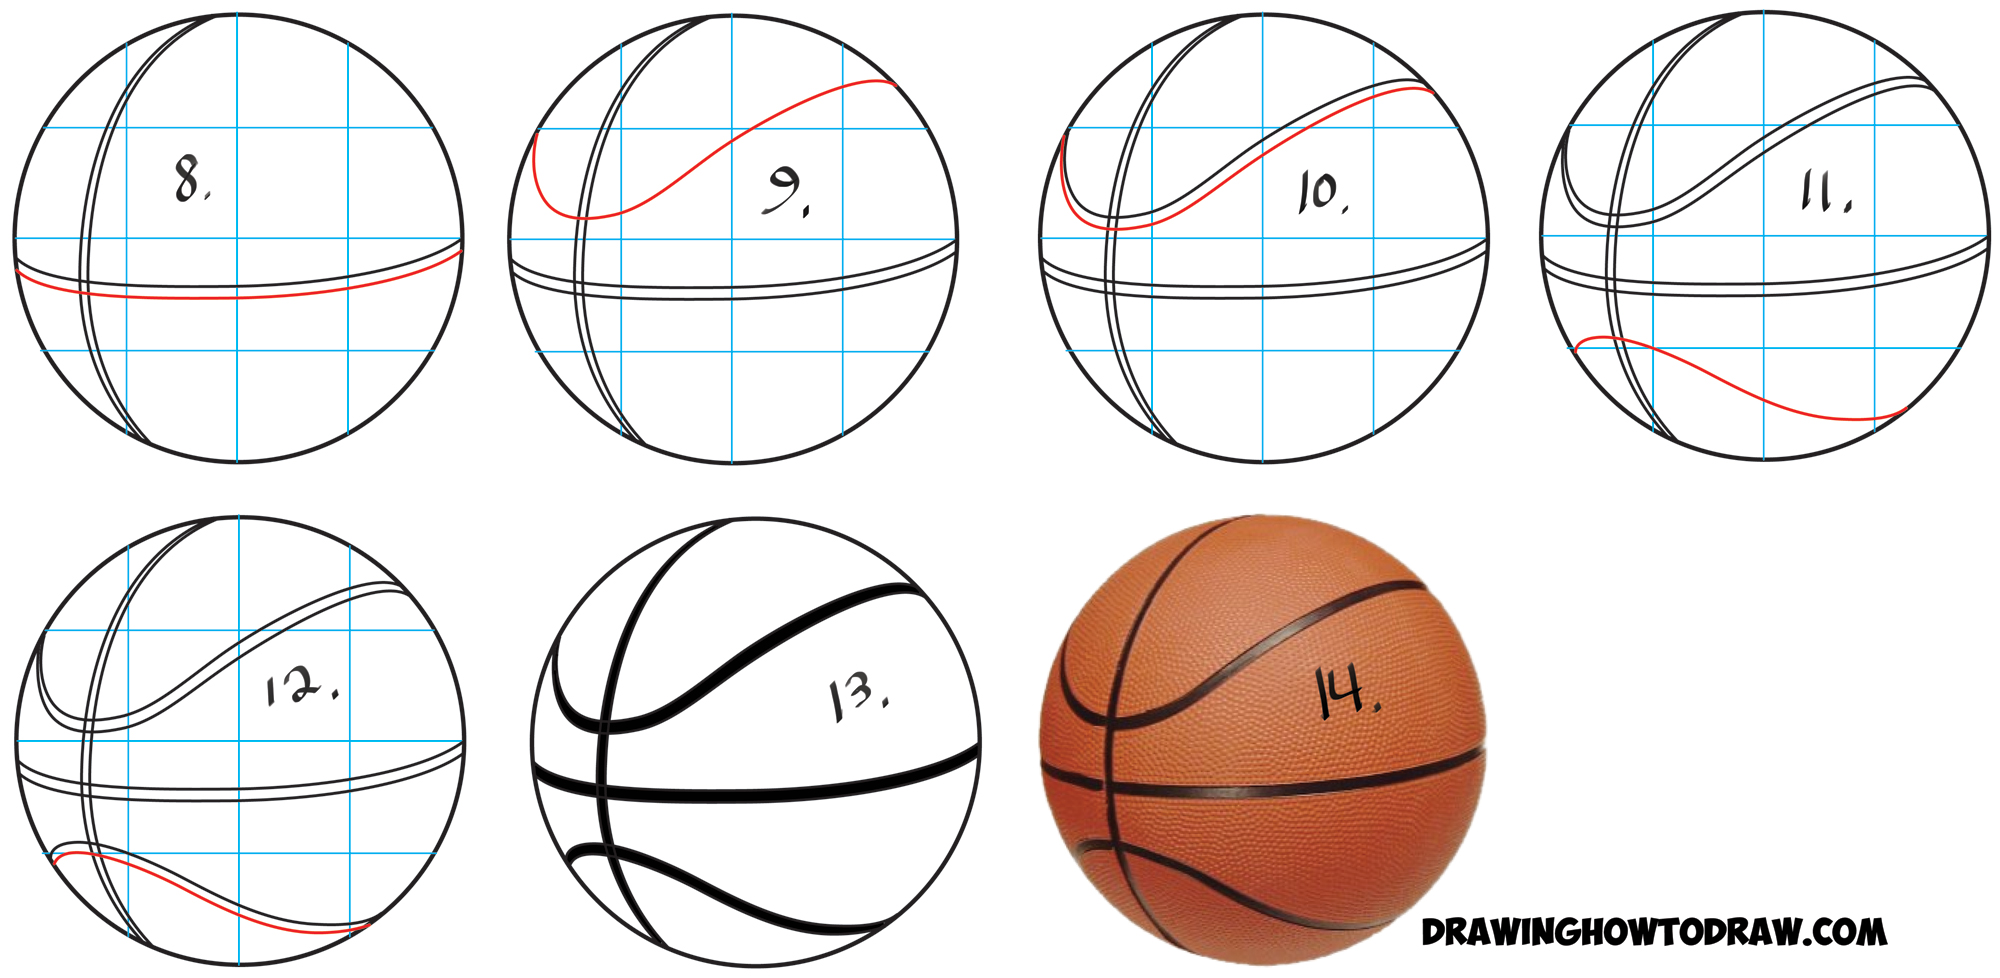 draw basketball app free download